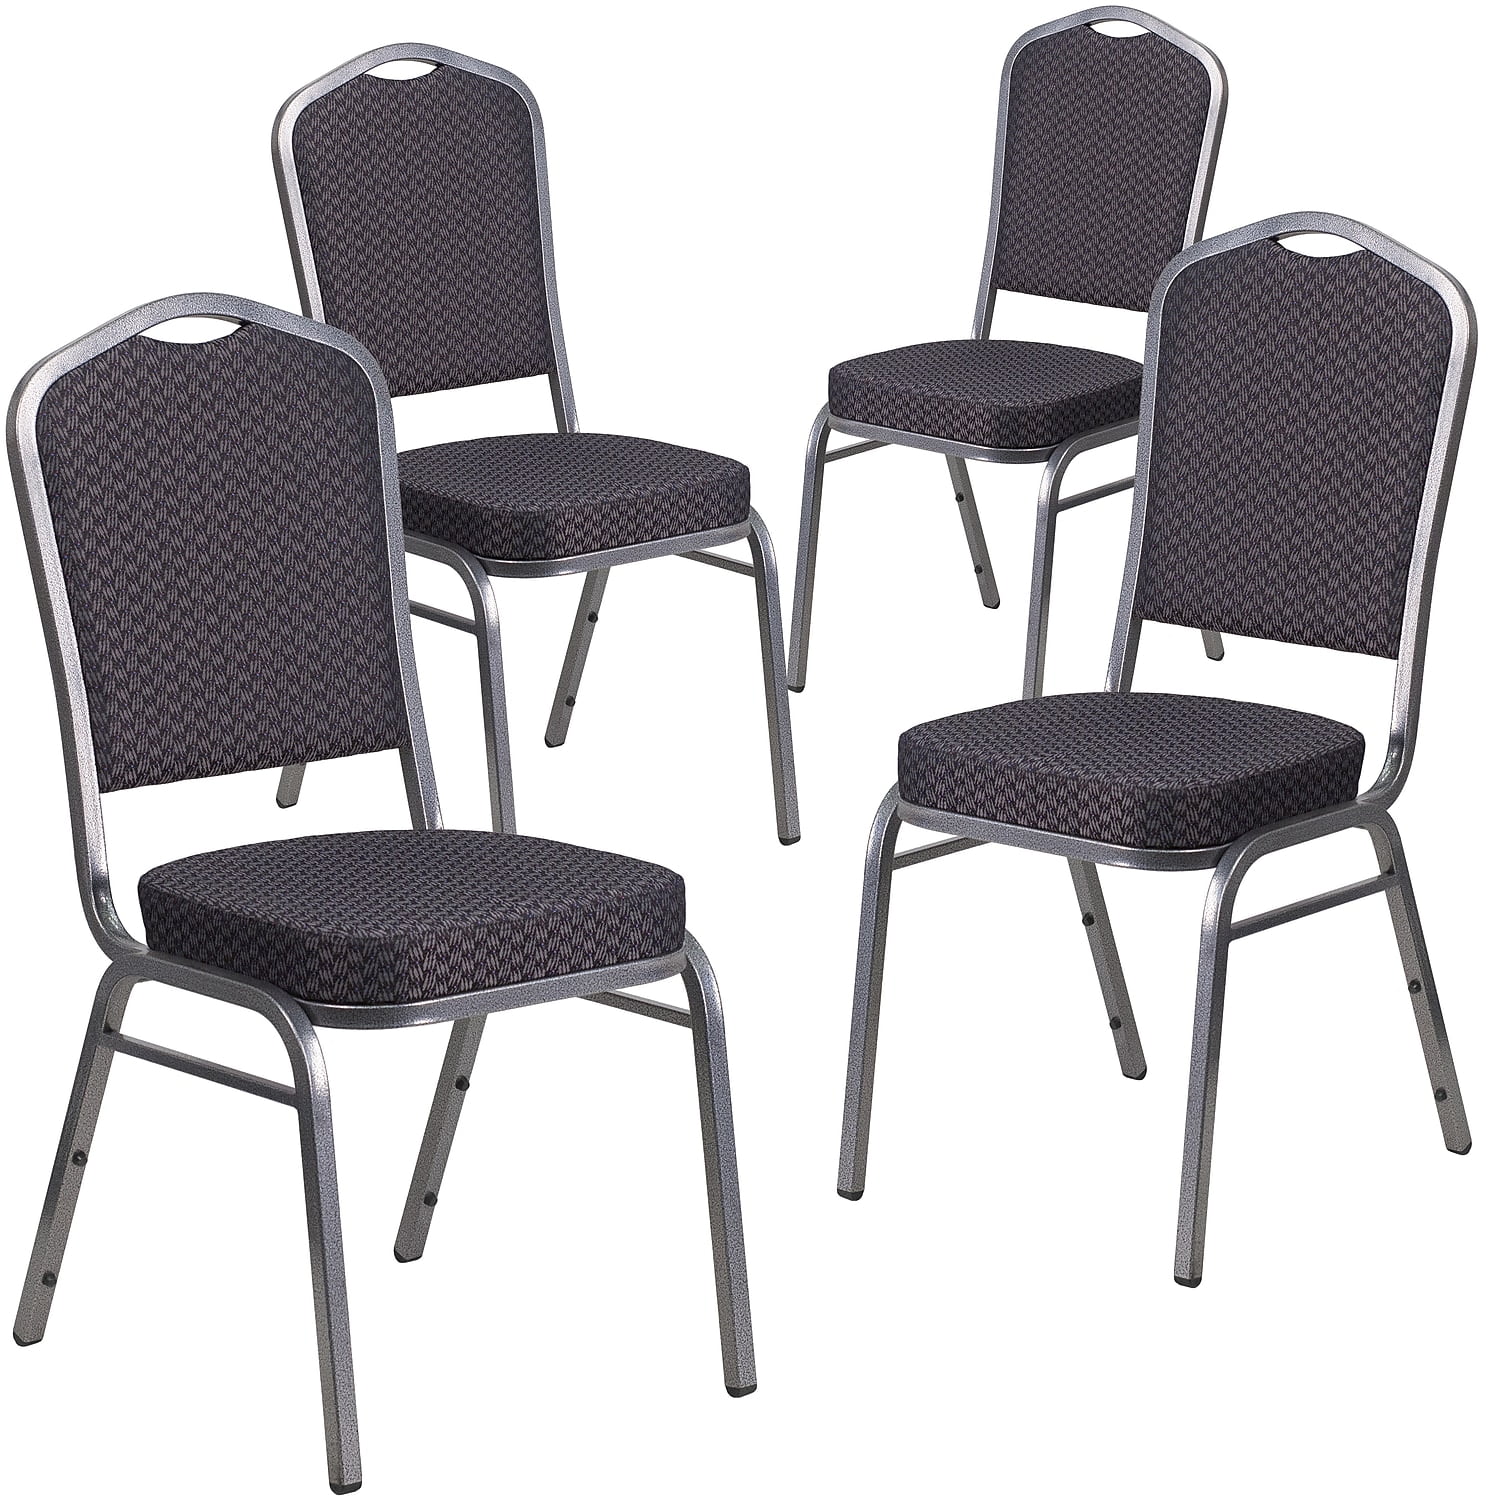 Flash Furniture HERCULES Series Crown Back Stacking Banquet Chair in Black Patterned Fabric Silver Vein Frame 